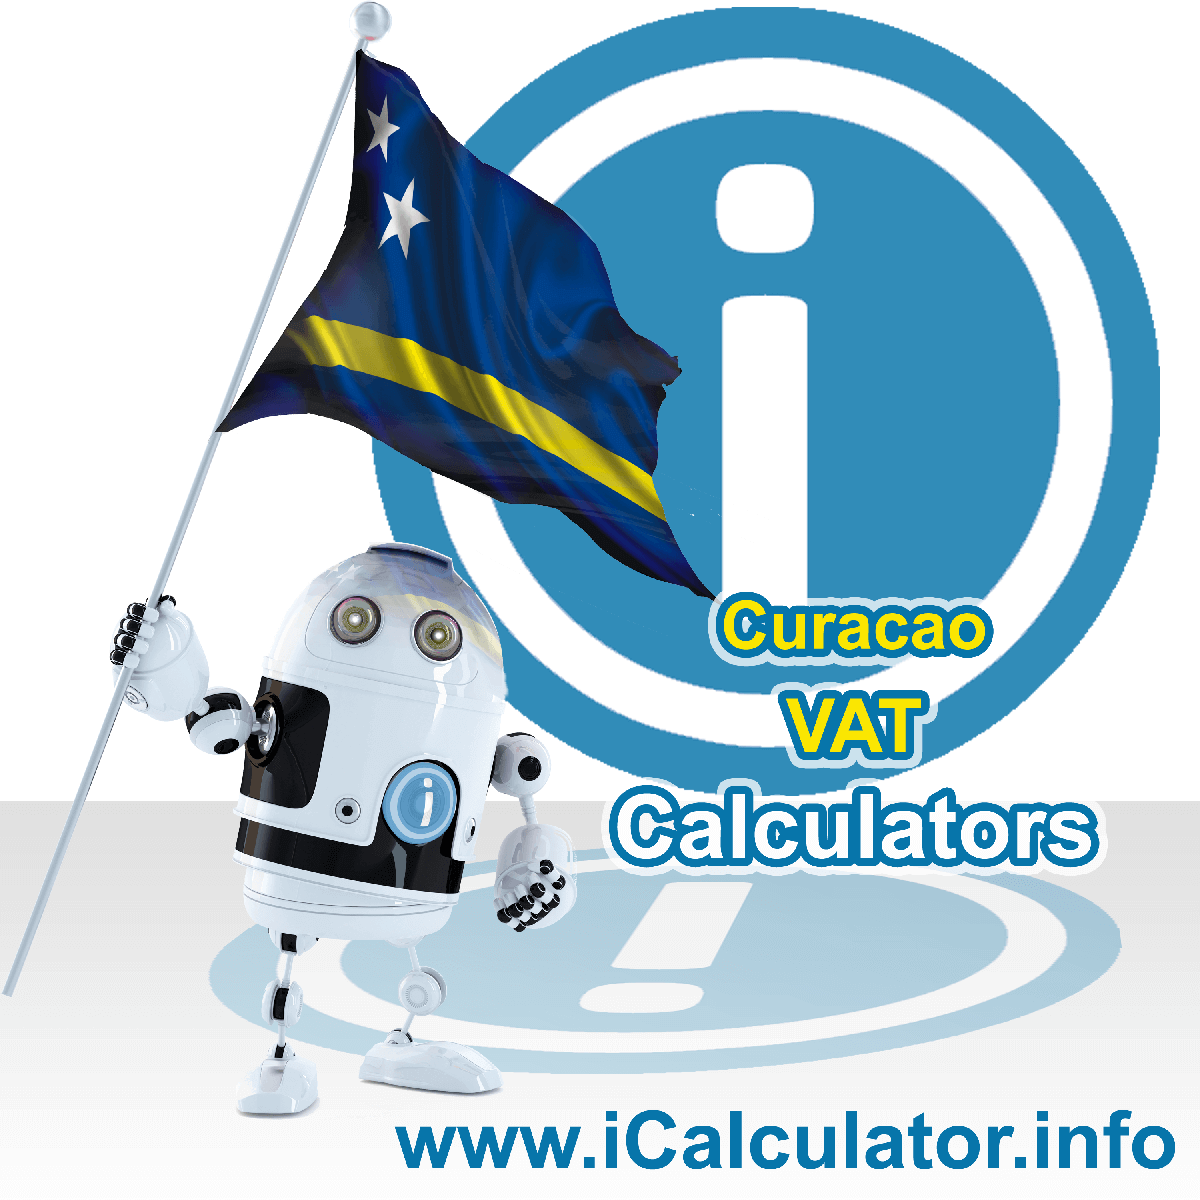 Curacao VAT Calculator. This image shows the Curacao flag and information relating to the VAT formula used for calculating Value Added Tax in Curacao using the Curacao VAT Calculator in 2023